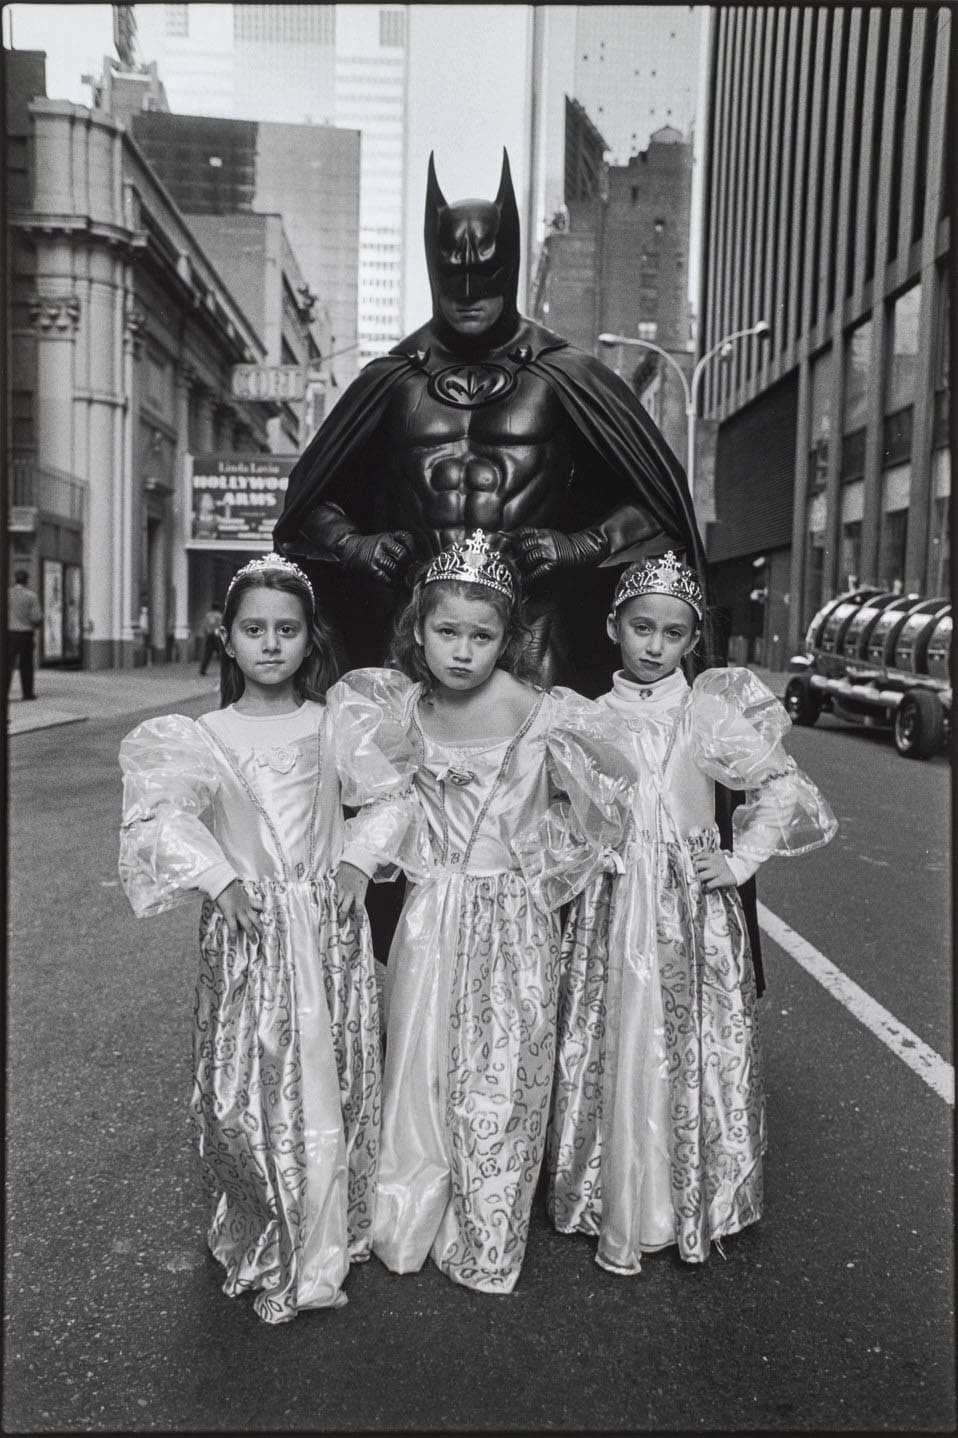 Mary Ellen Mark, 'Batman and Little Barbies at the Toys “R” Us Holiday Parade, New York, 2002'